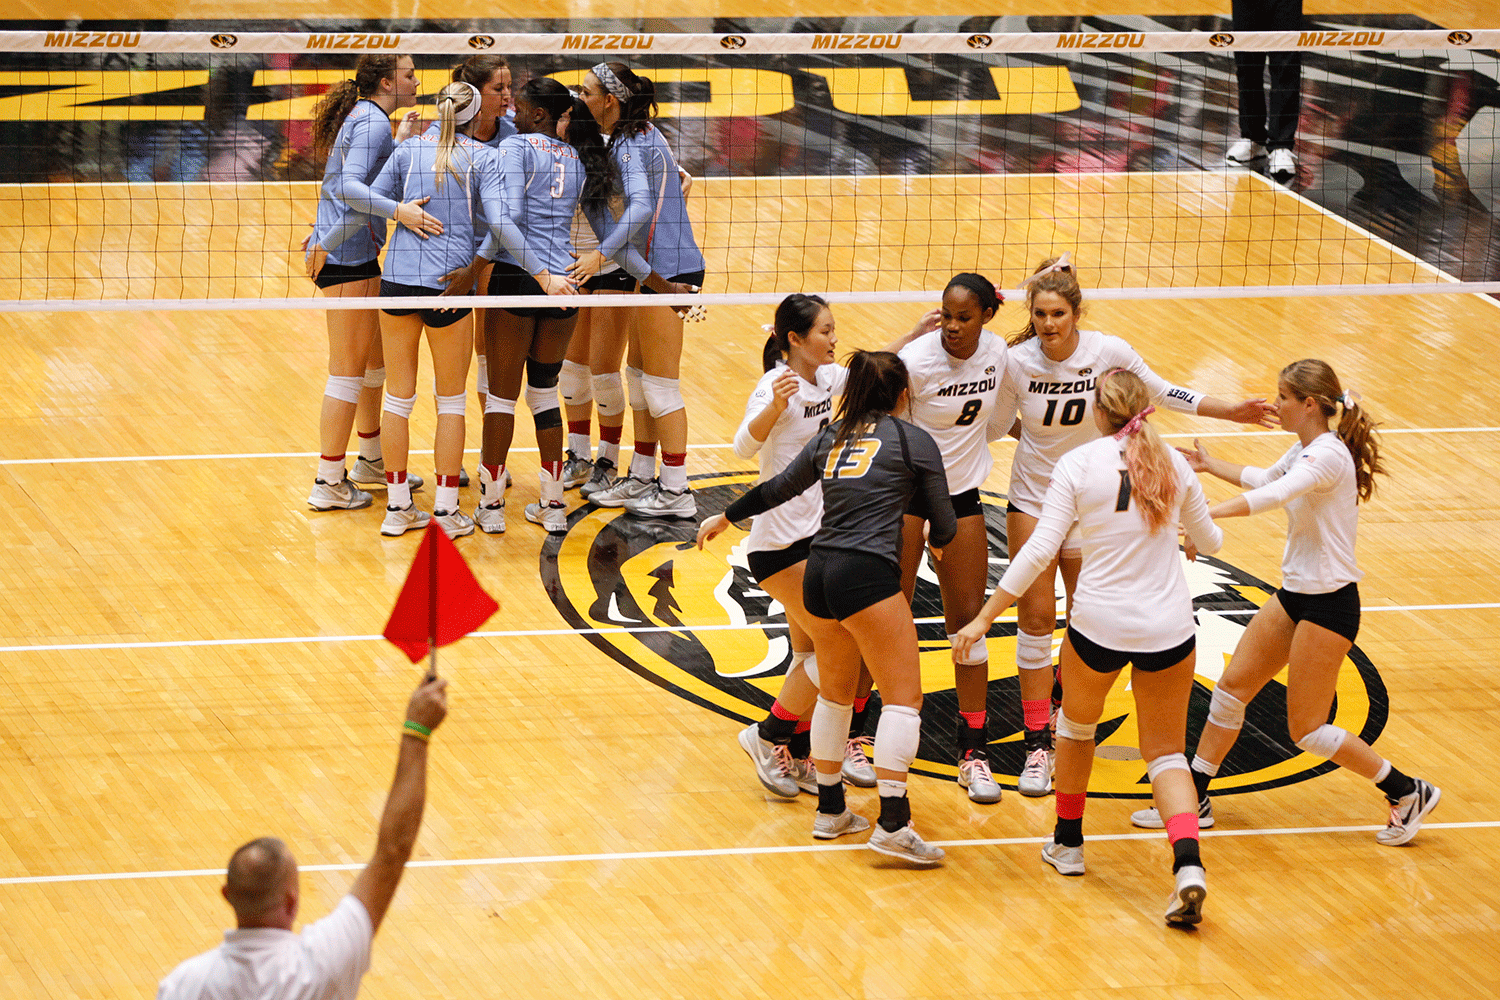 The Tigers bring it in, giving each other high-fives and words of encouragement after earning another point against Ole Miss during the second set.